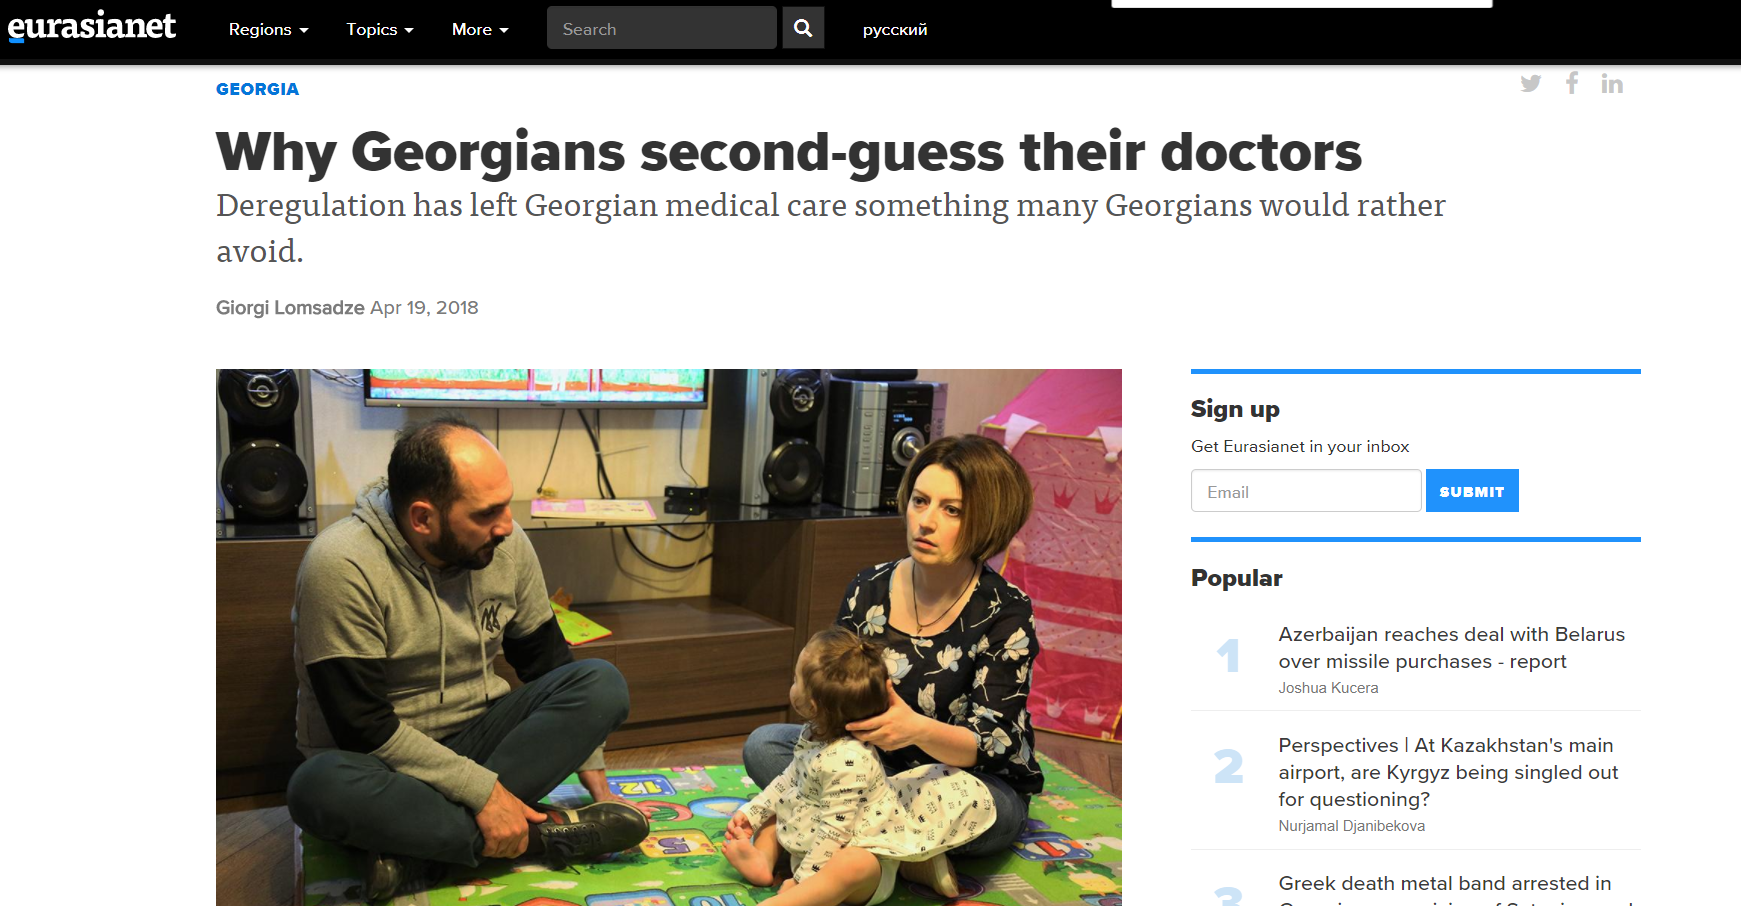 Why Georgians second-guess their doctors - Deregulation has left Georgian medical care something many Georgians would rather avoid | Curatio International